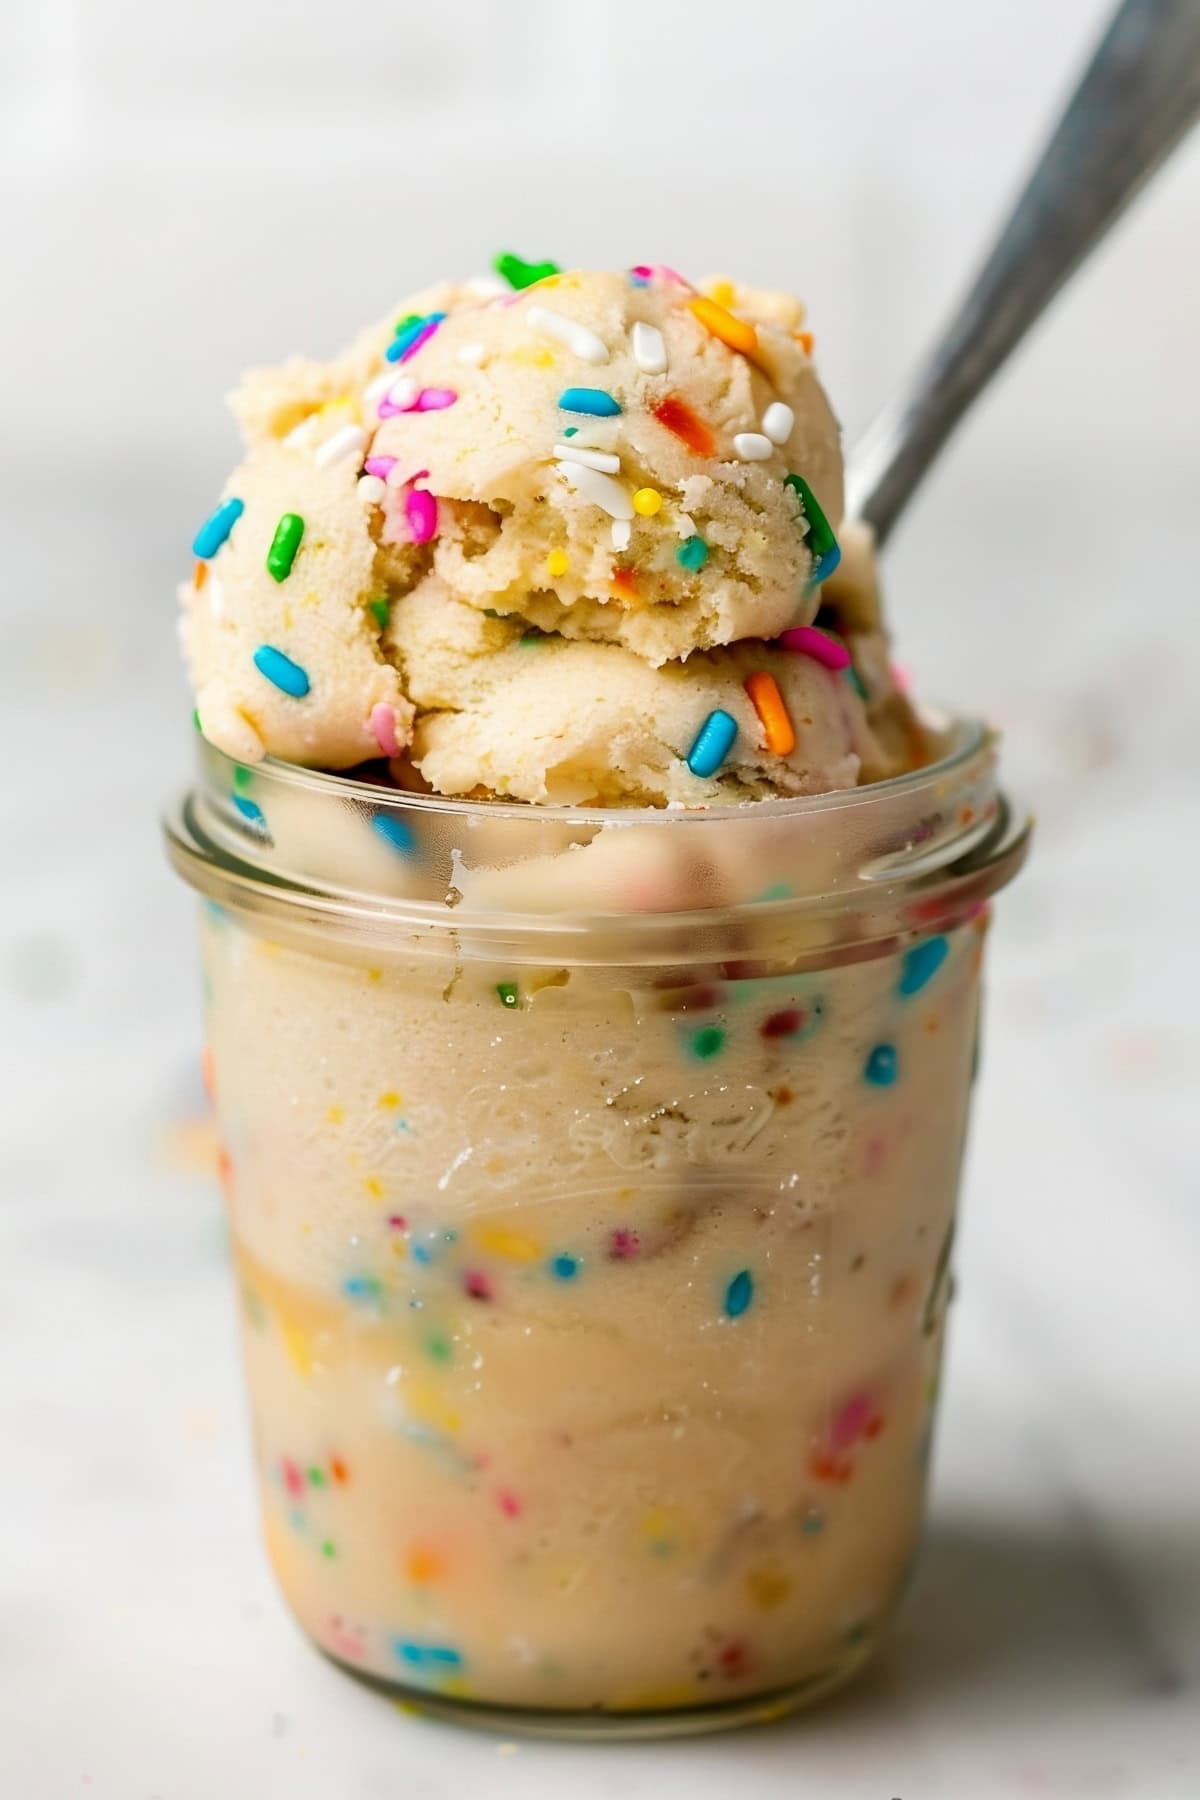 Homemade edible sugar cookie dough with sprinkles in a glass.